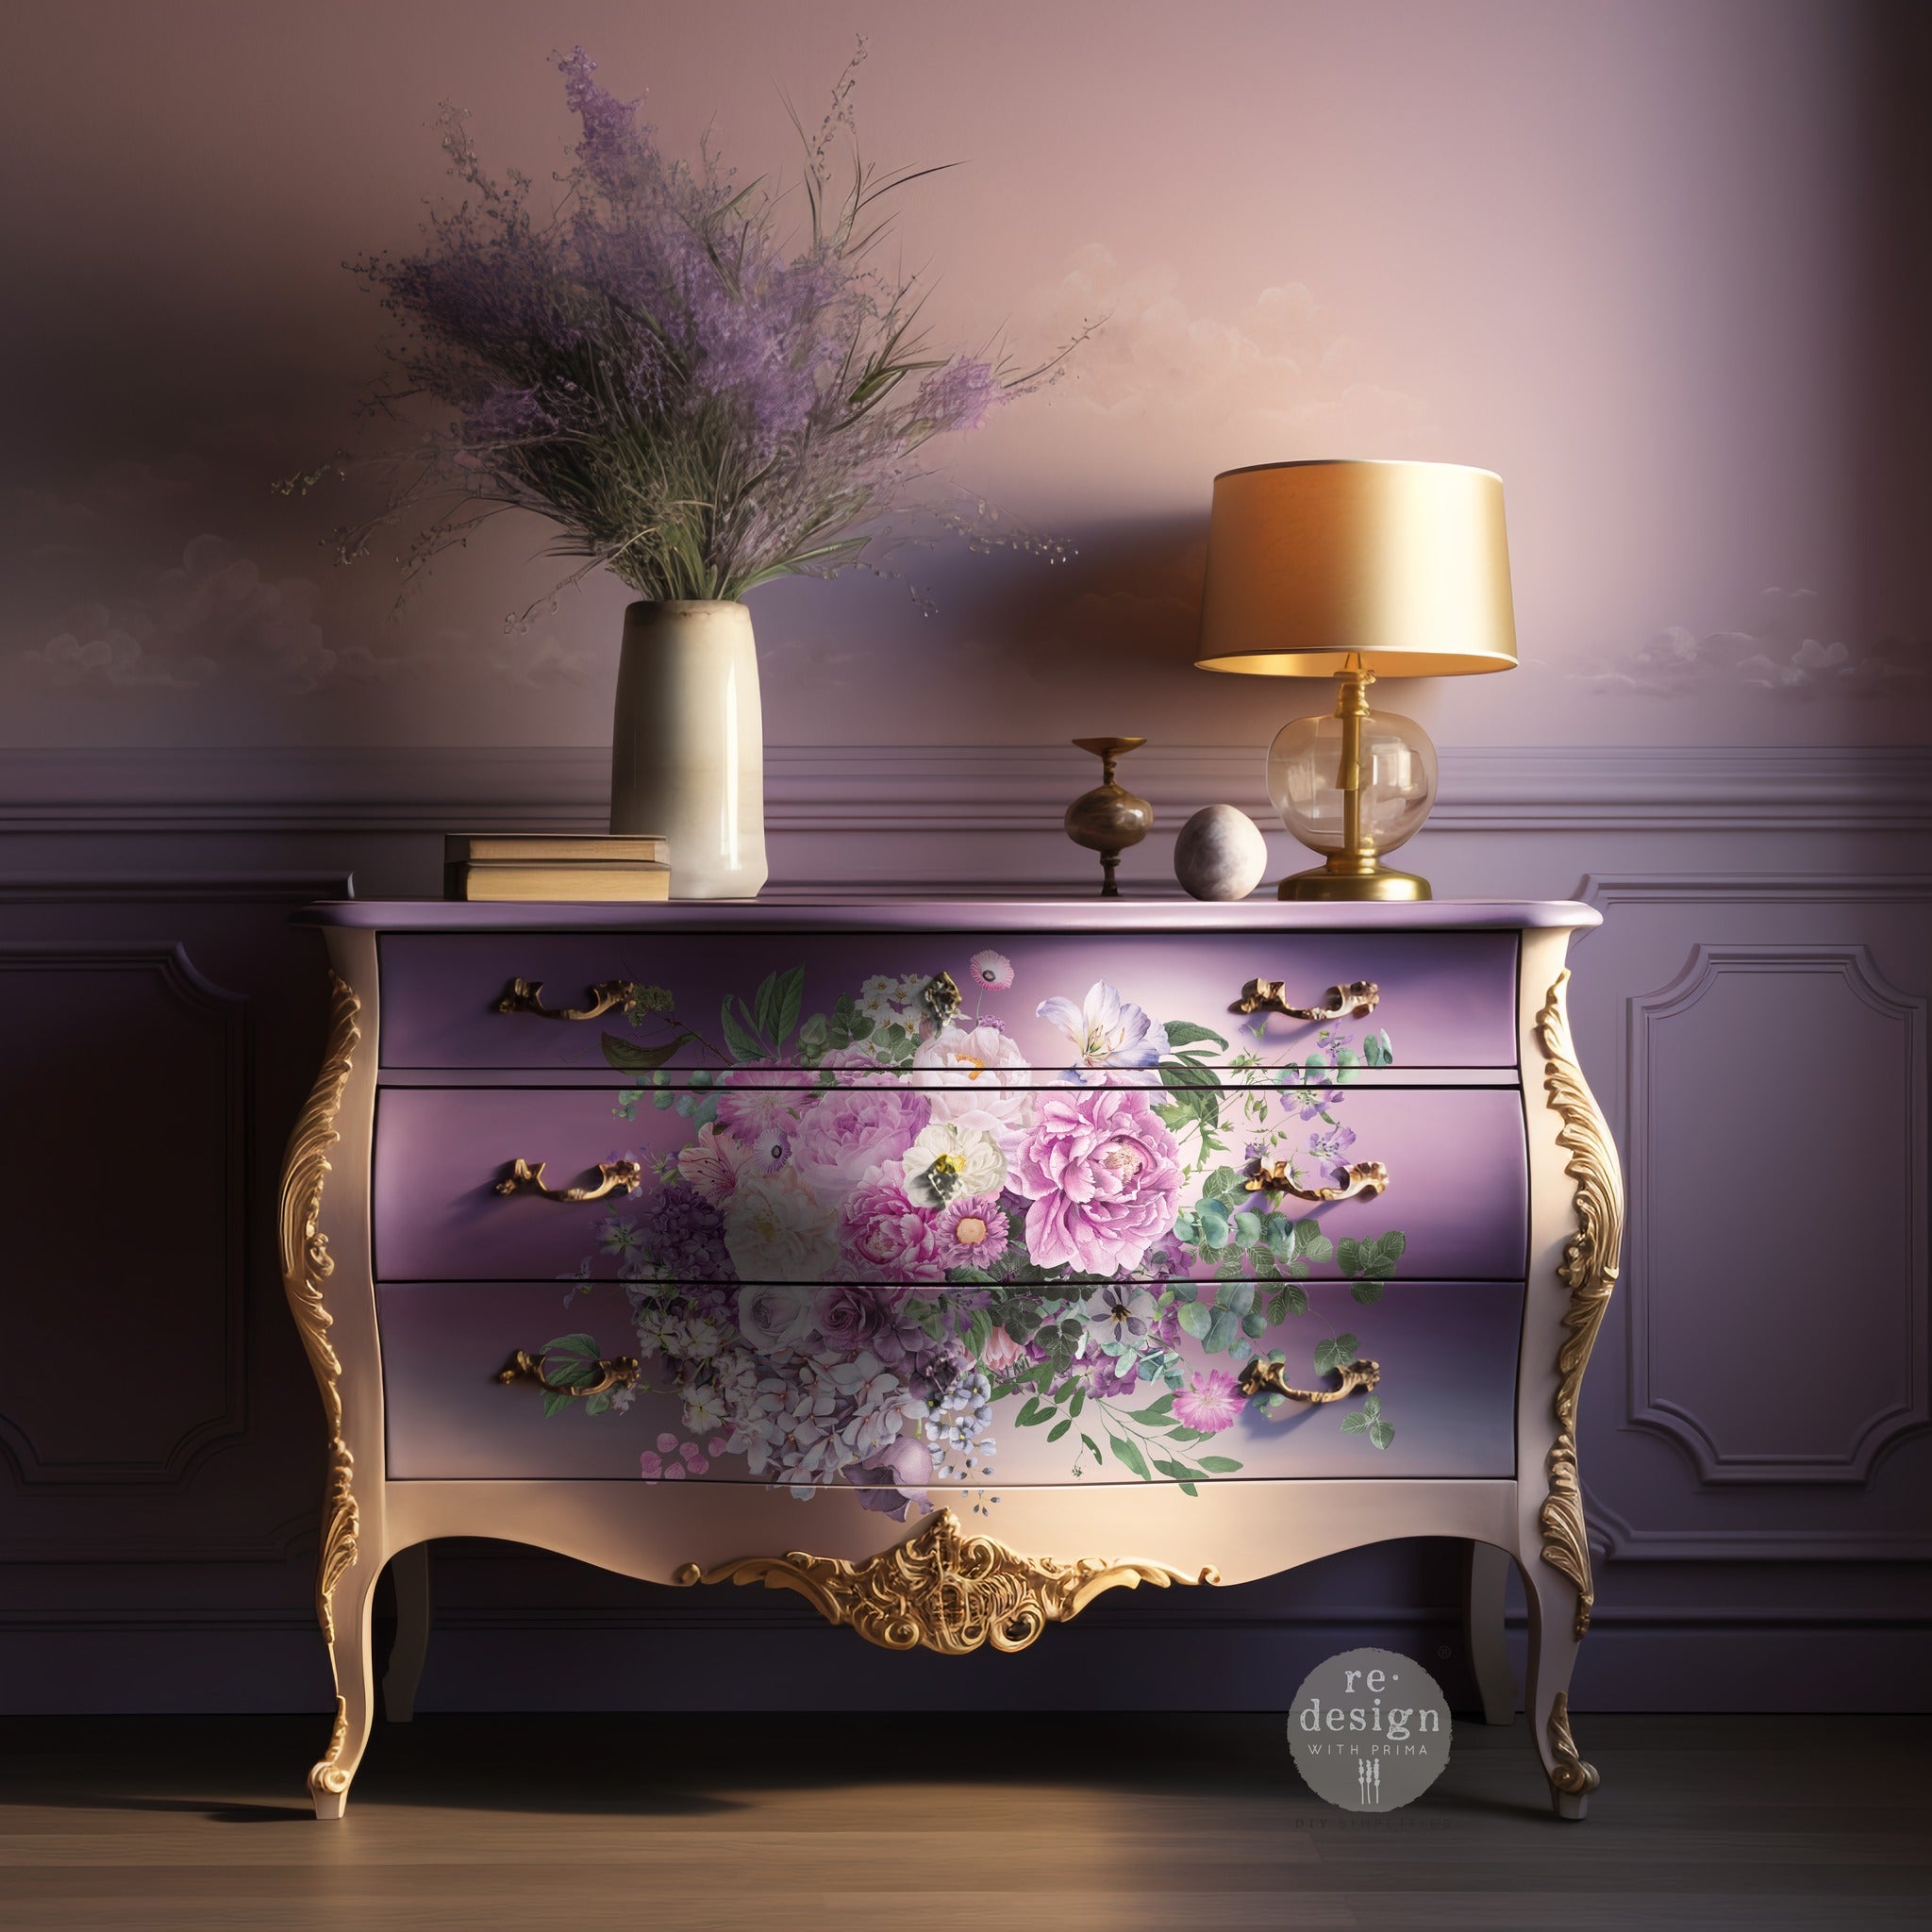 A vintage 3 drawer dresser is painted lavender with golden yellow and features ReDesign with Prima's Kacha Morning Purple transfer on the center of its drawers. 